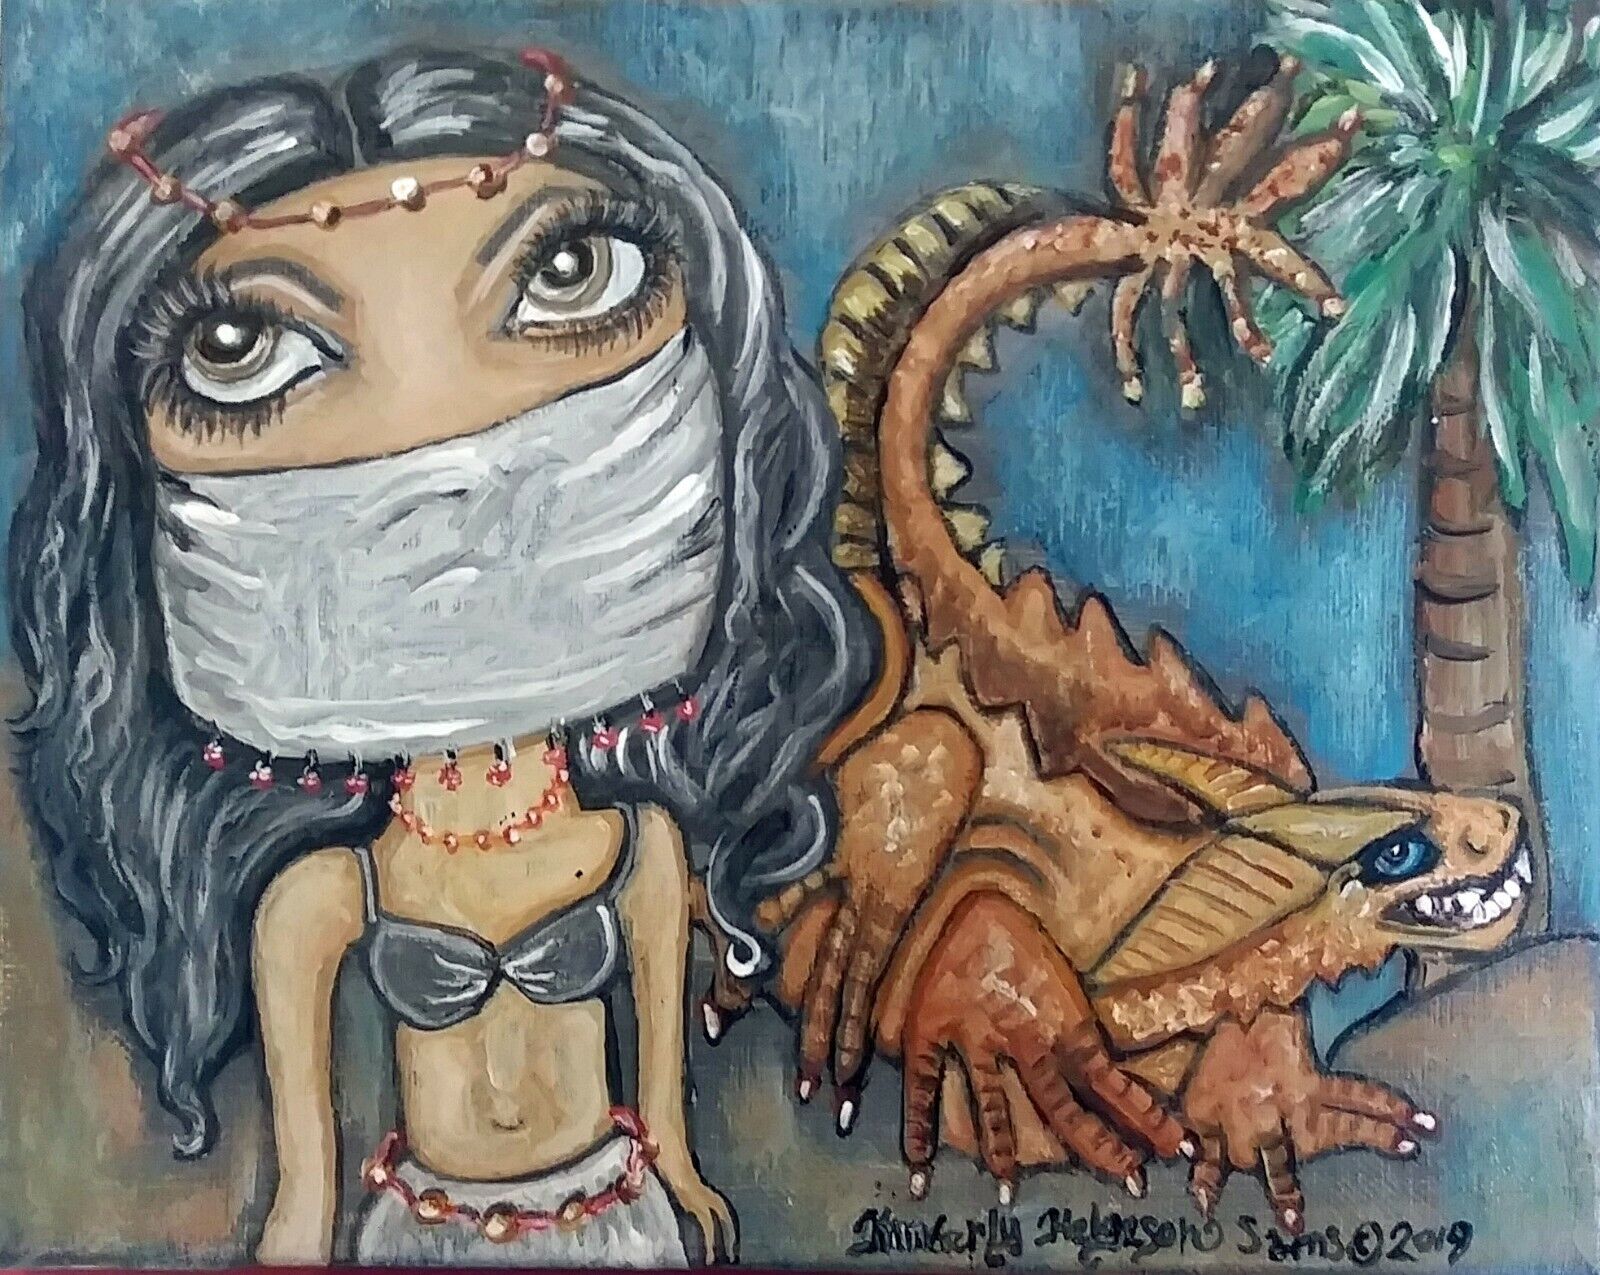 Belly Dancer and Dragon Collectible Art Print 5x7 Signed by Artist KSams Big Eye